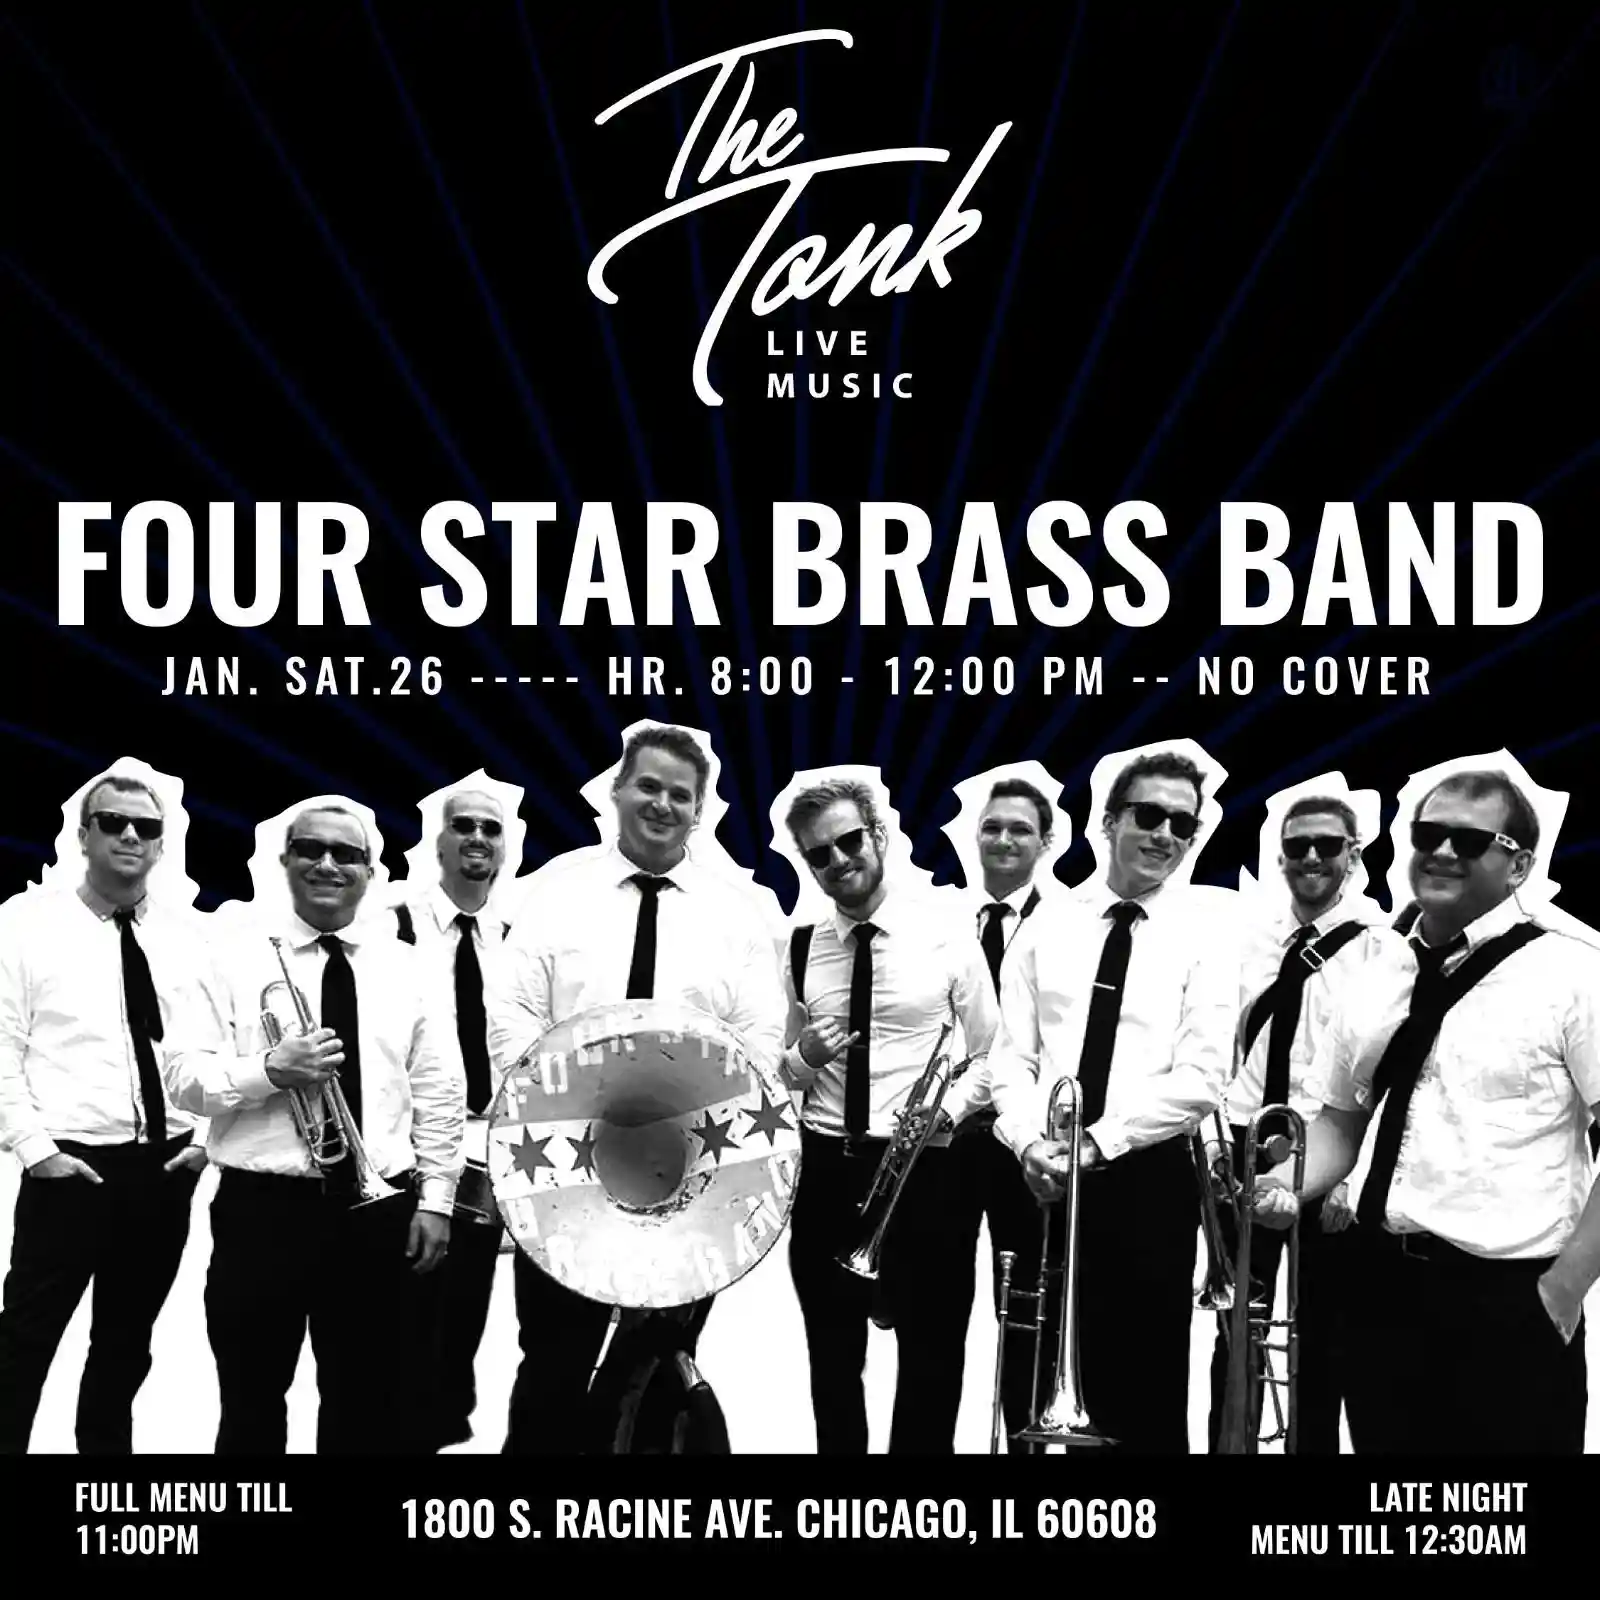 Four Star Brass Band Poster